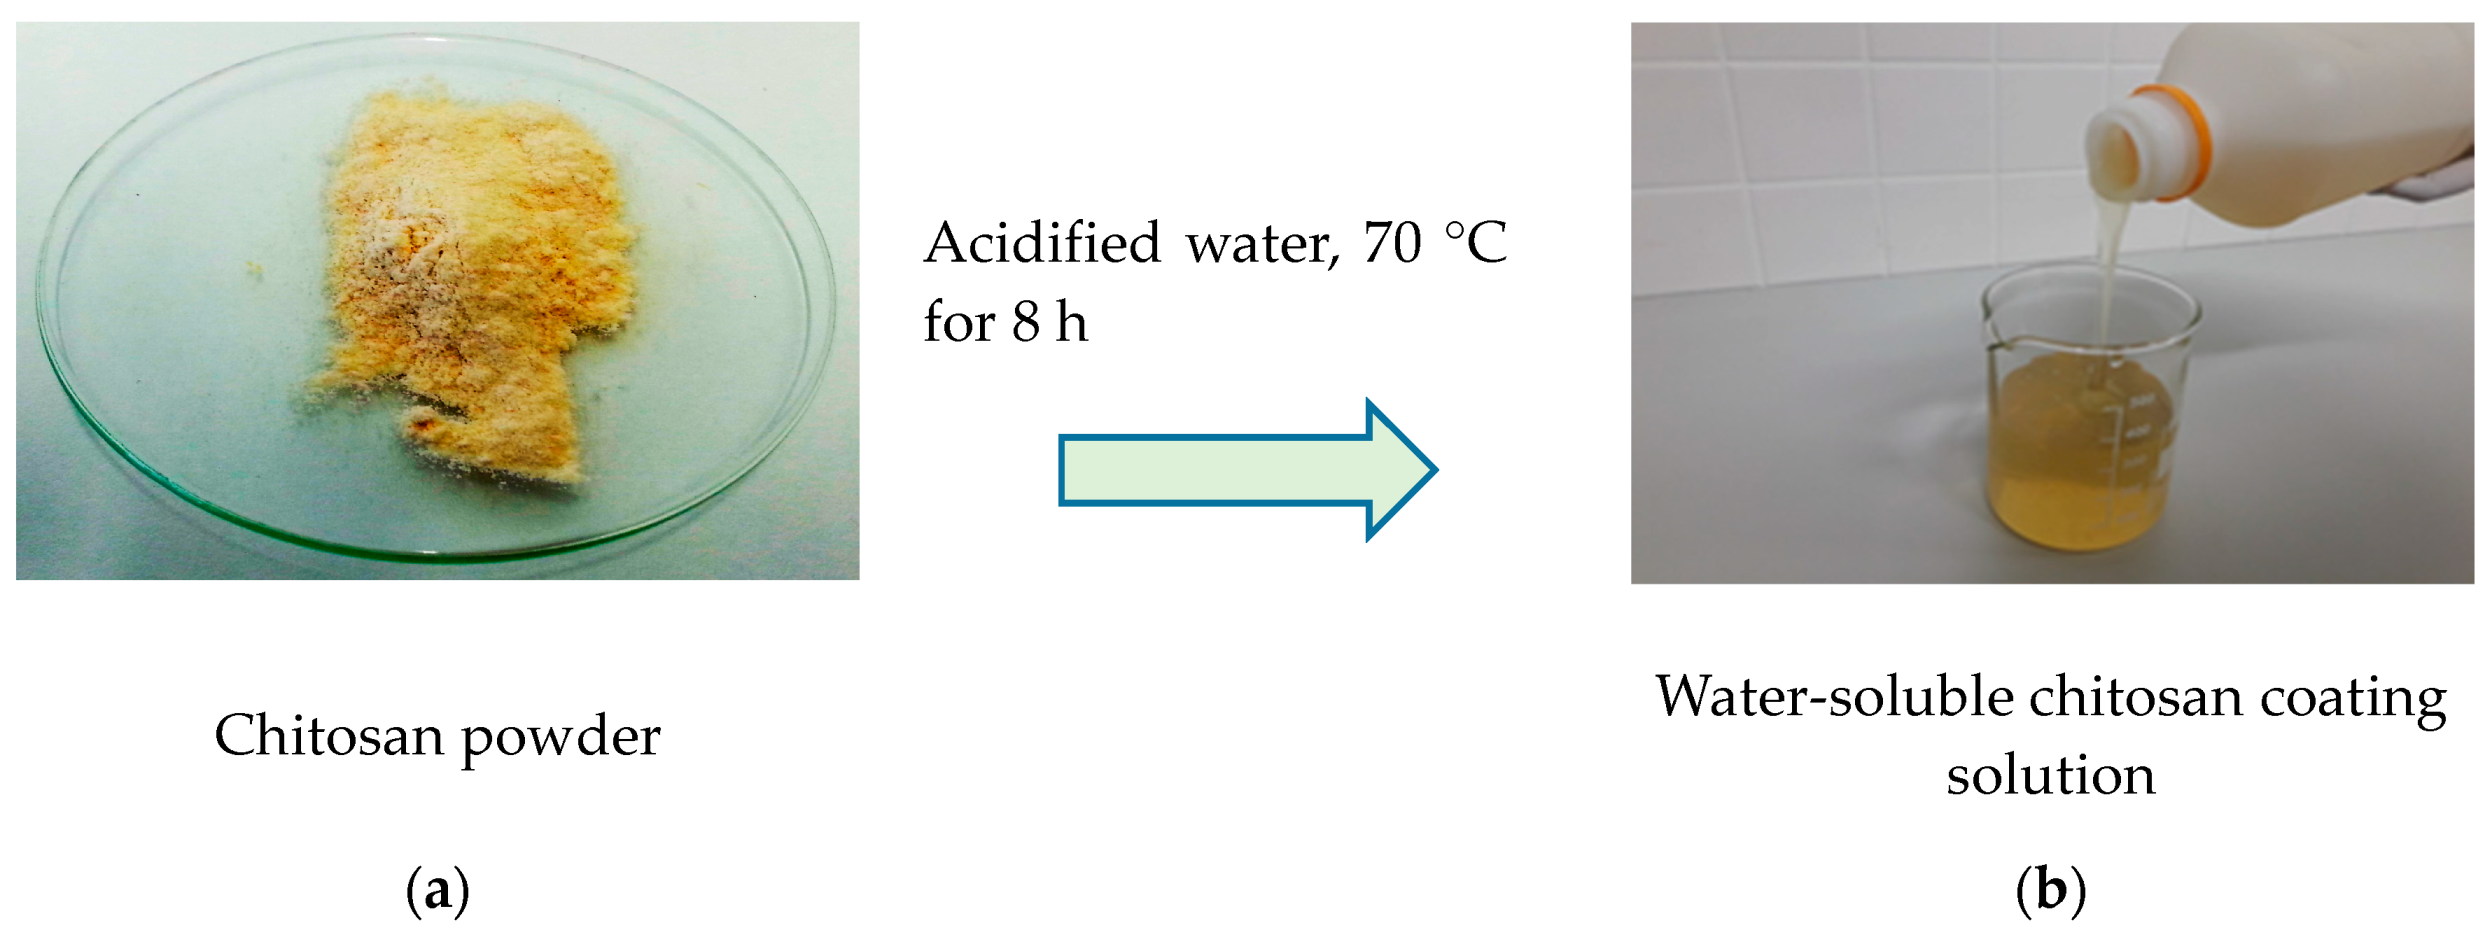 Polymers | Free Full-Text | Application of Industrially Produced Chitosan  in the Surface Treatment of Fibre-Based Material: Effect of Drying Method  and Number of Coating Layers on Mechanical and Barrier Properties